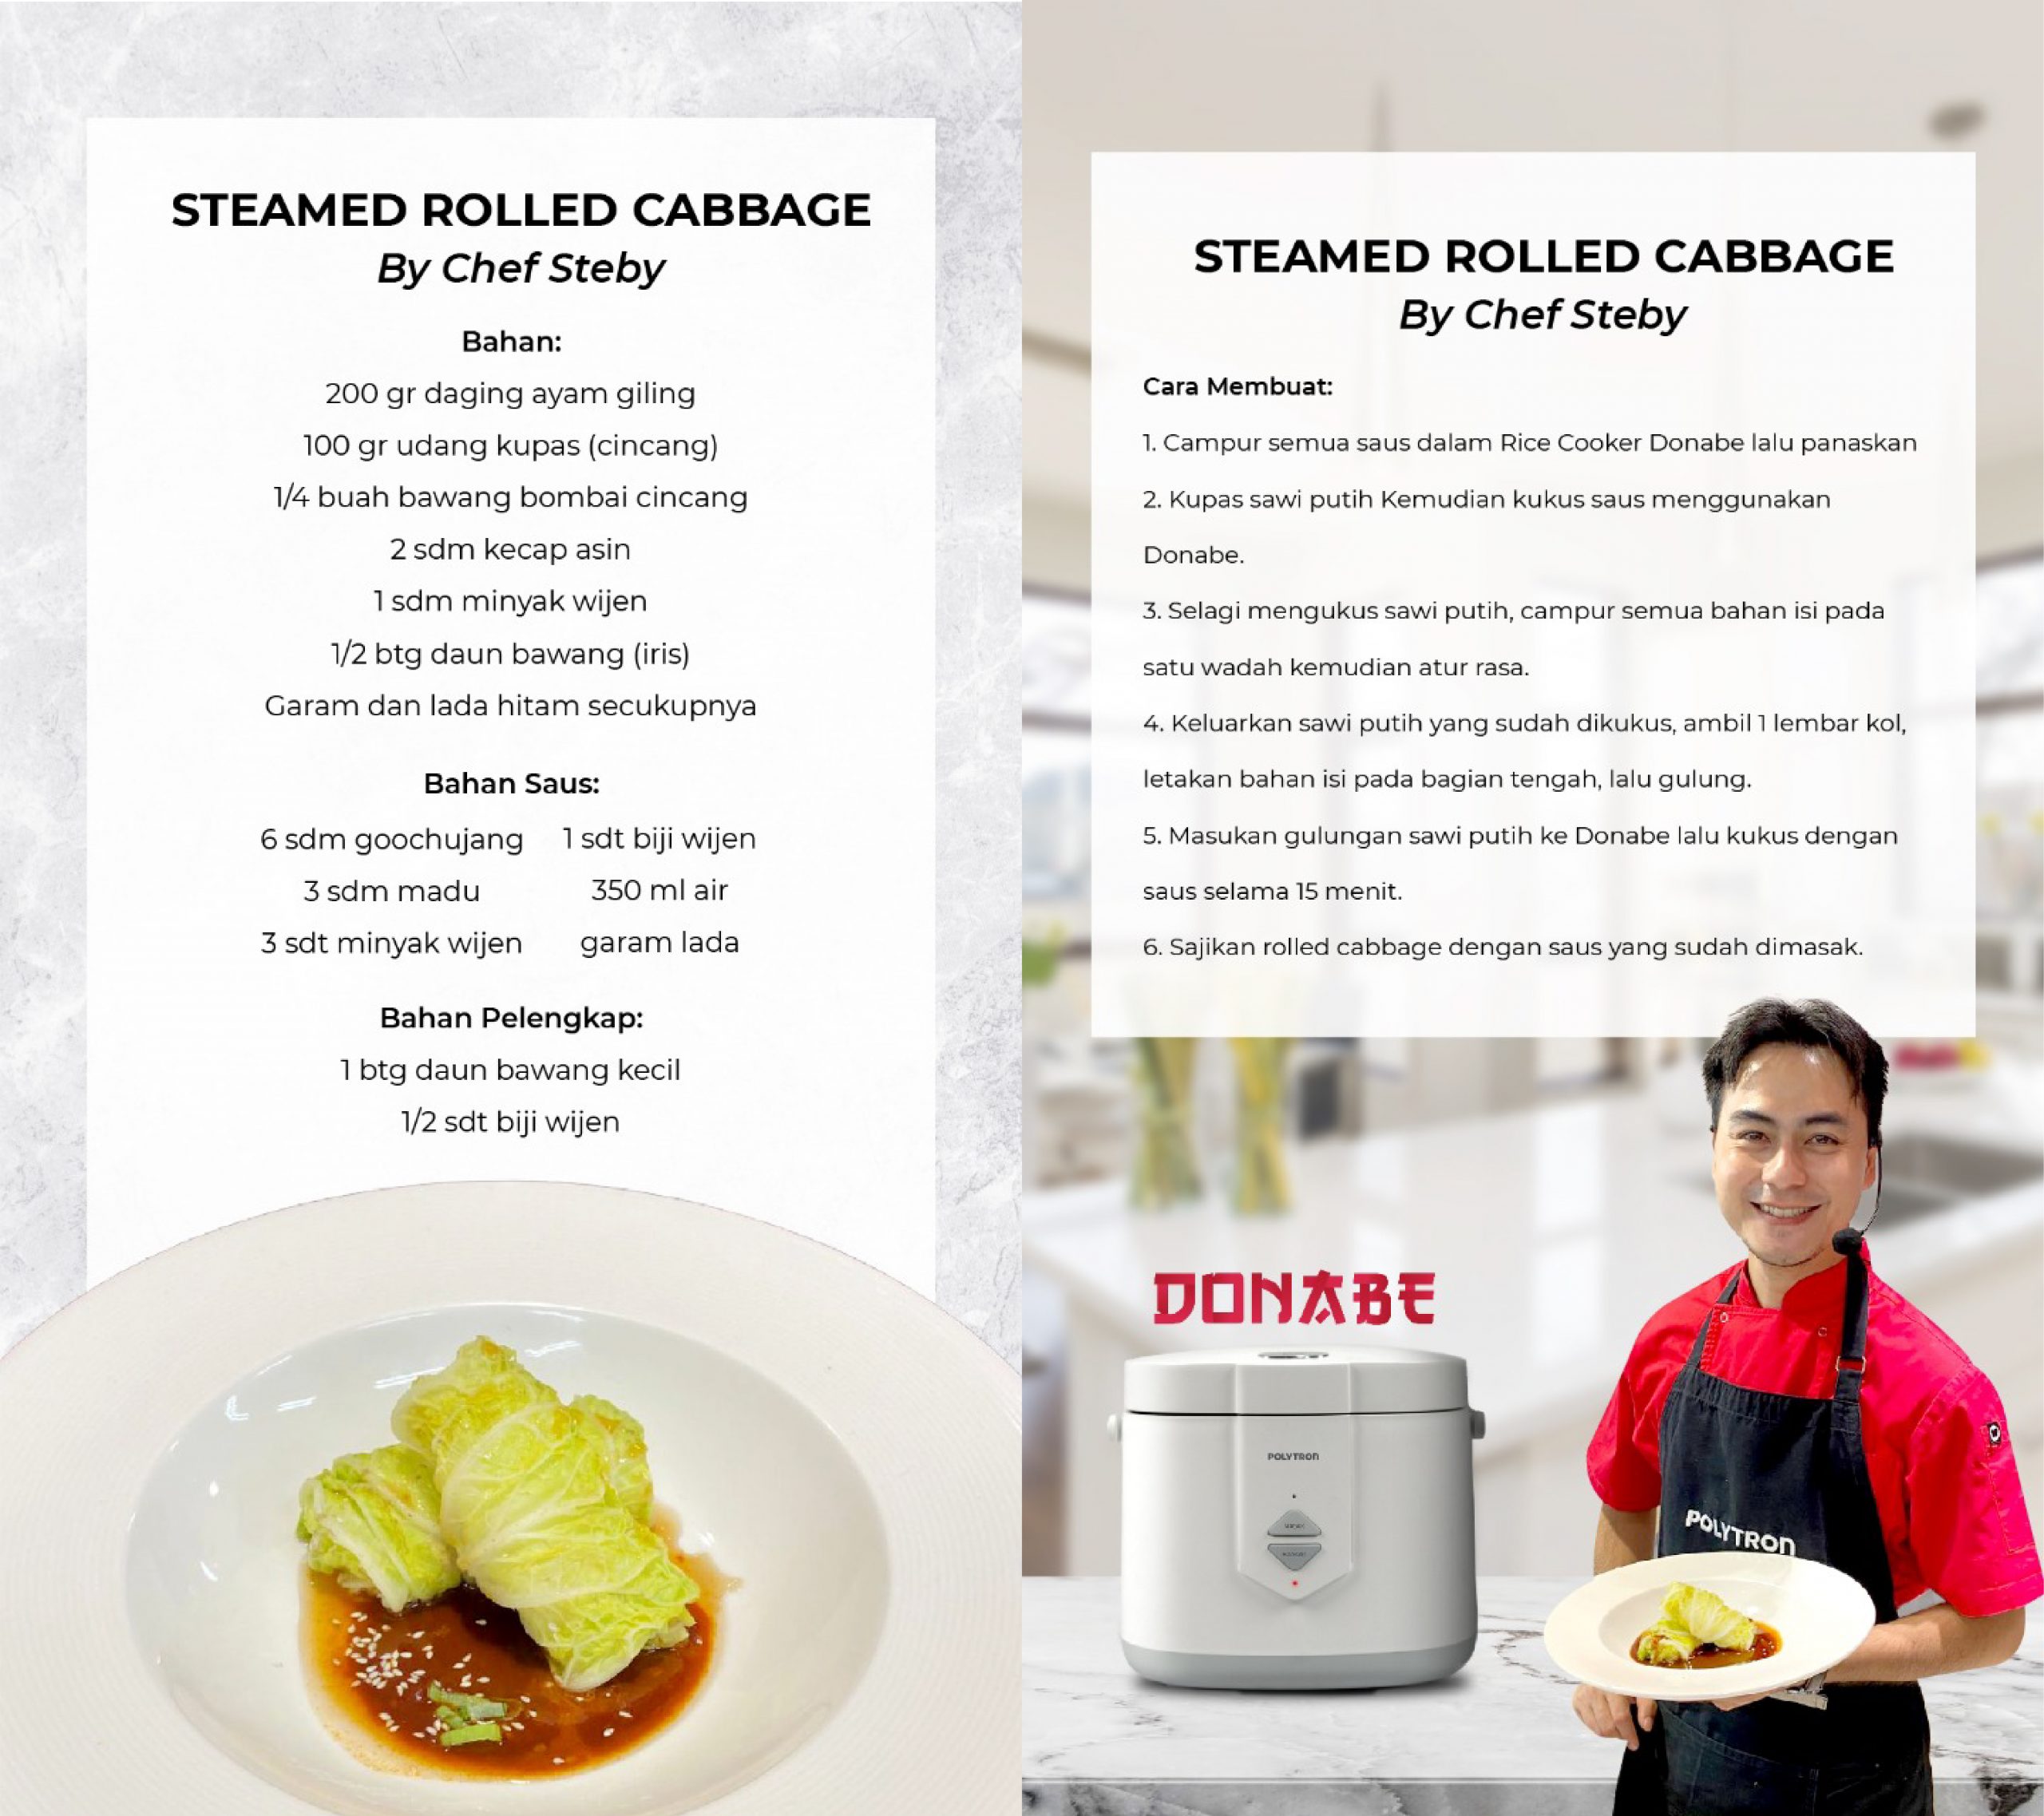 Resep Steamed Rolled Cabbage